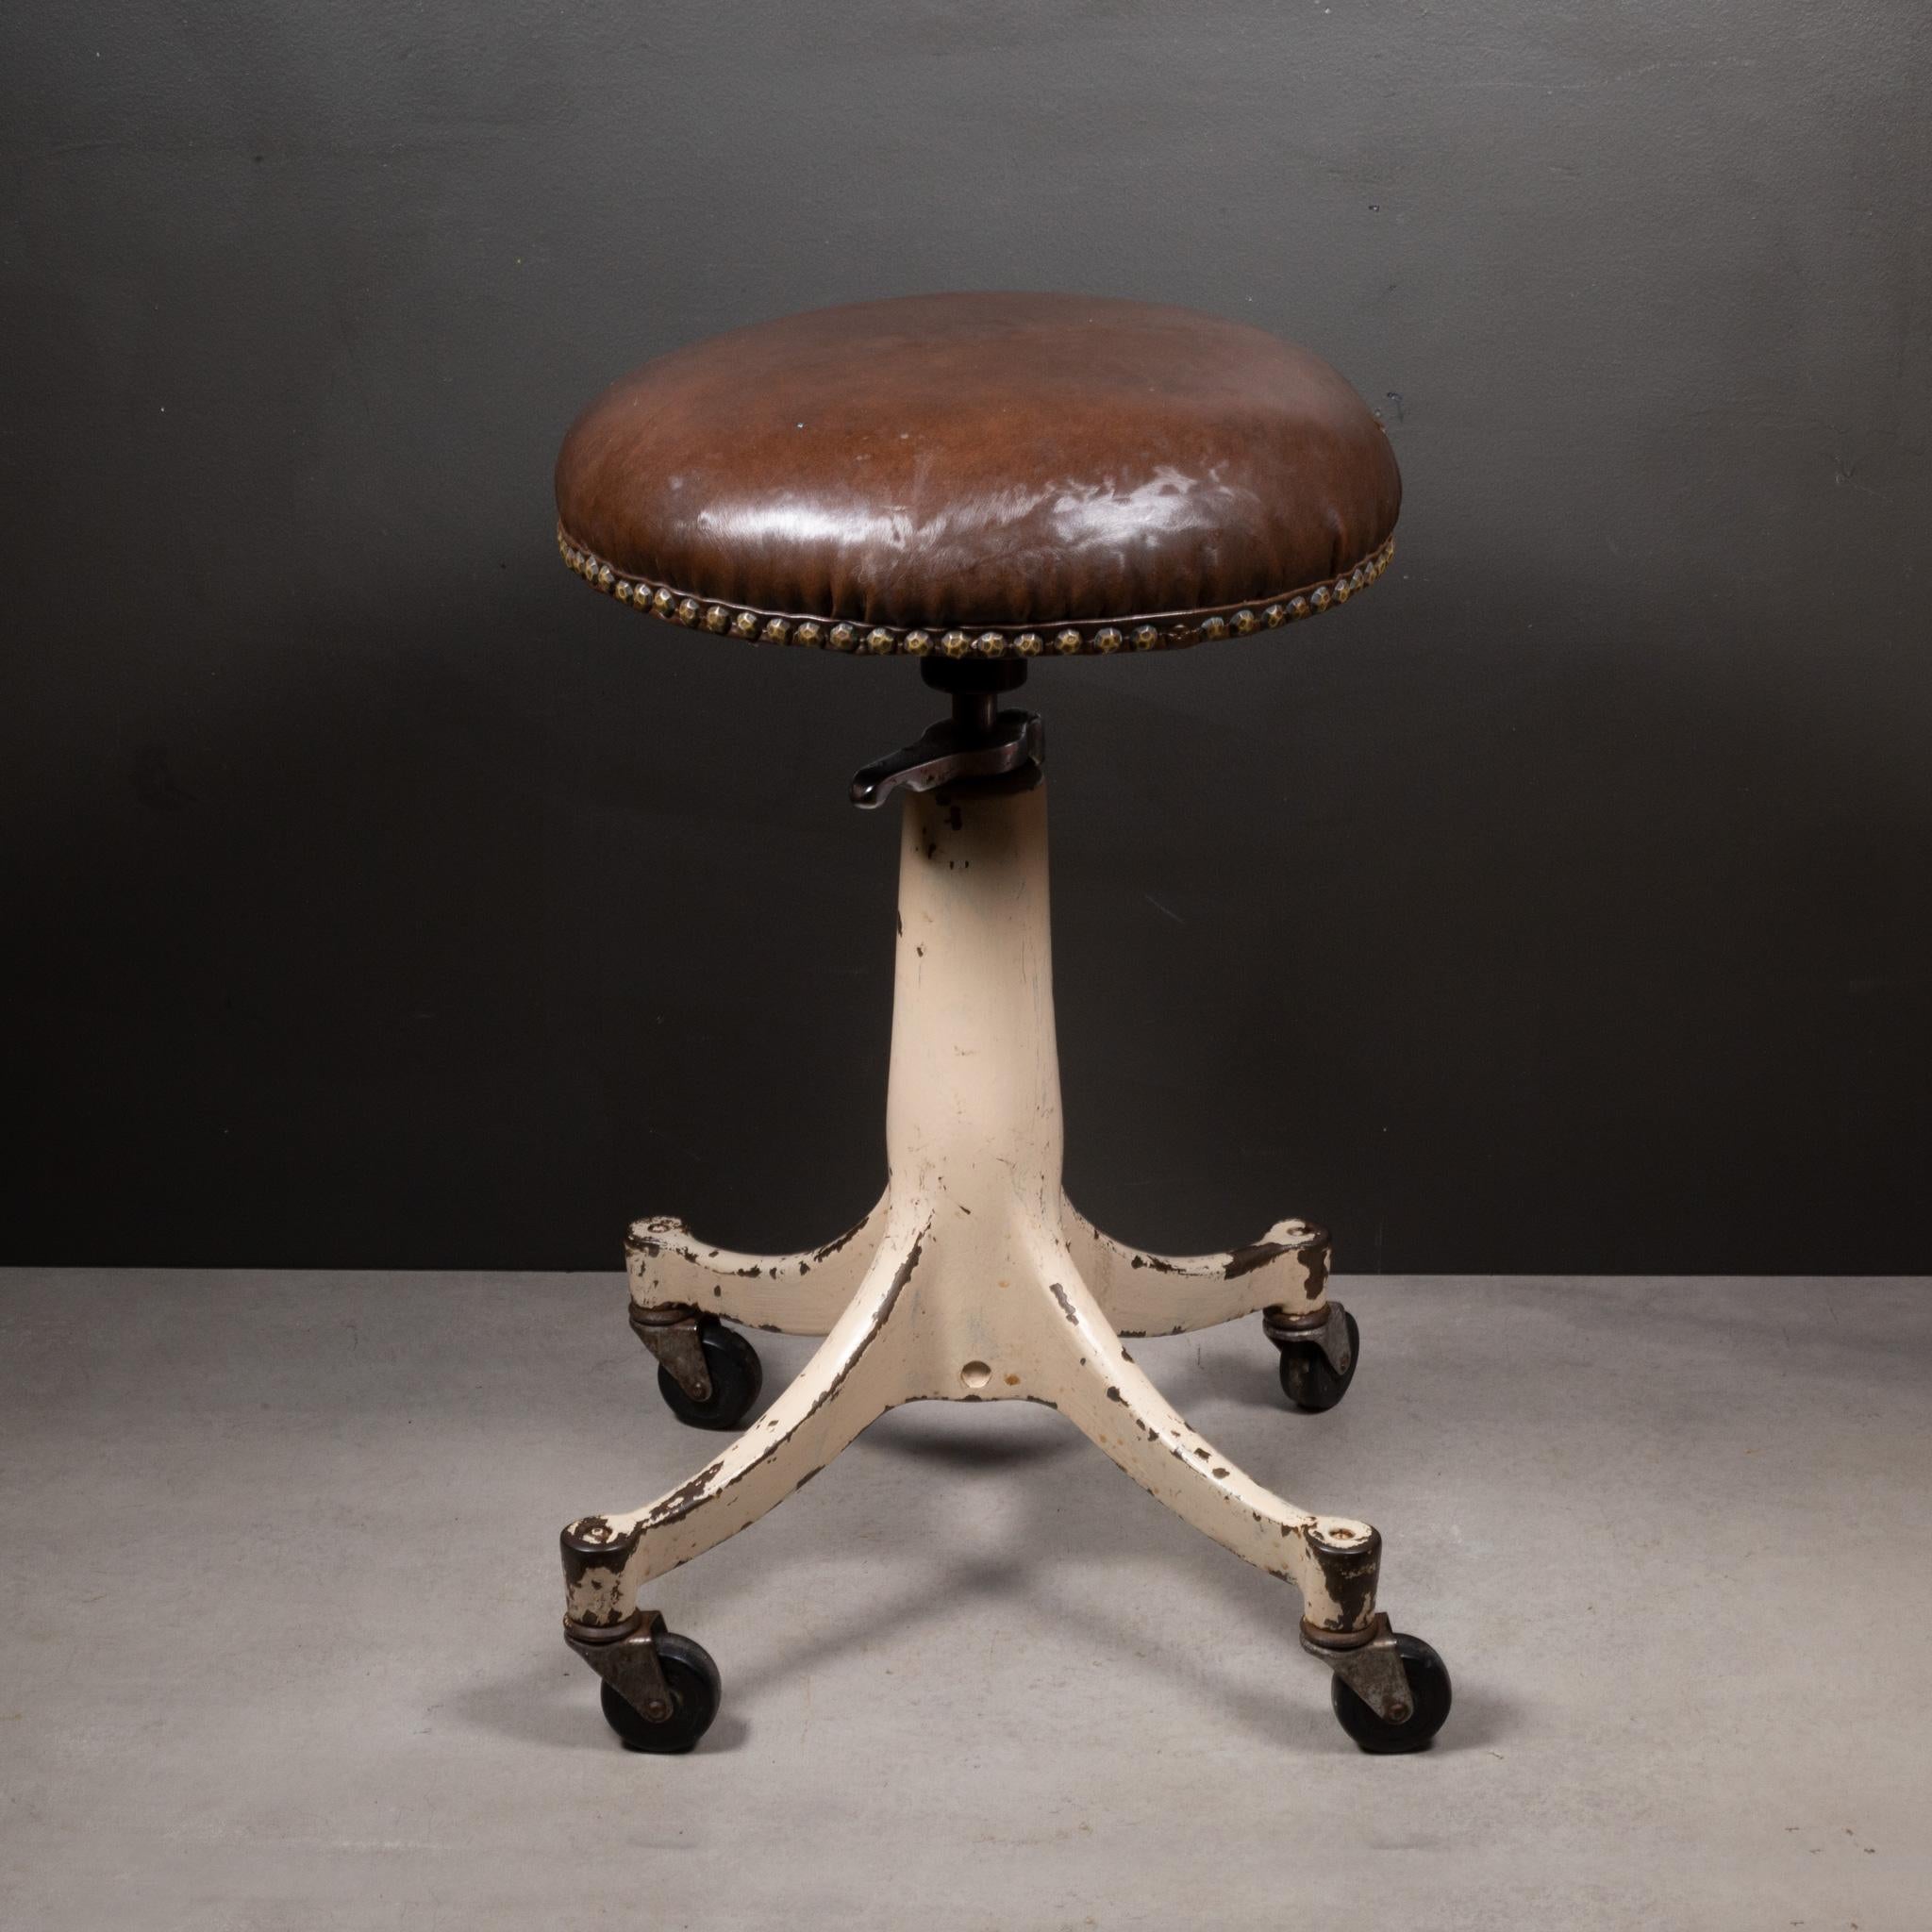 ABOUT

An adjustable, Bausch & Lomb Optometrist stool on cast iron base with casters. Original brown swivel vinyl seat with brass tacks. The height is easily adjusted by simply raising the seat and lowering by releasing the chrome handle. Glides